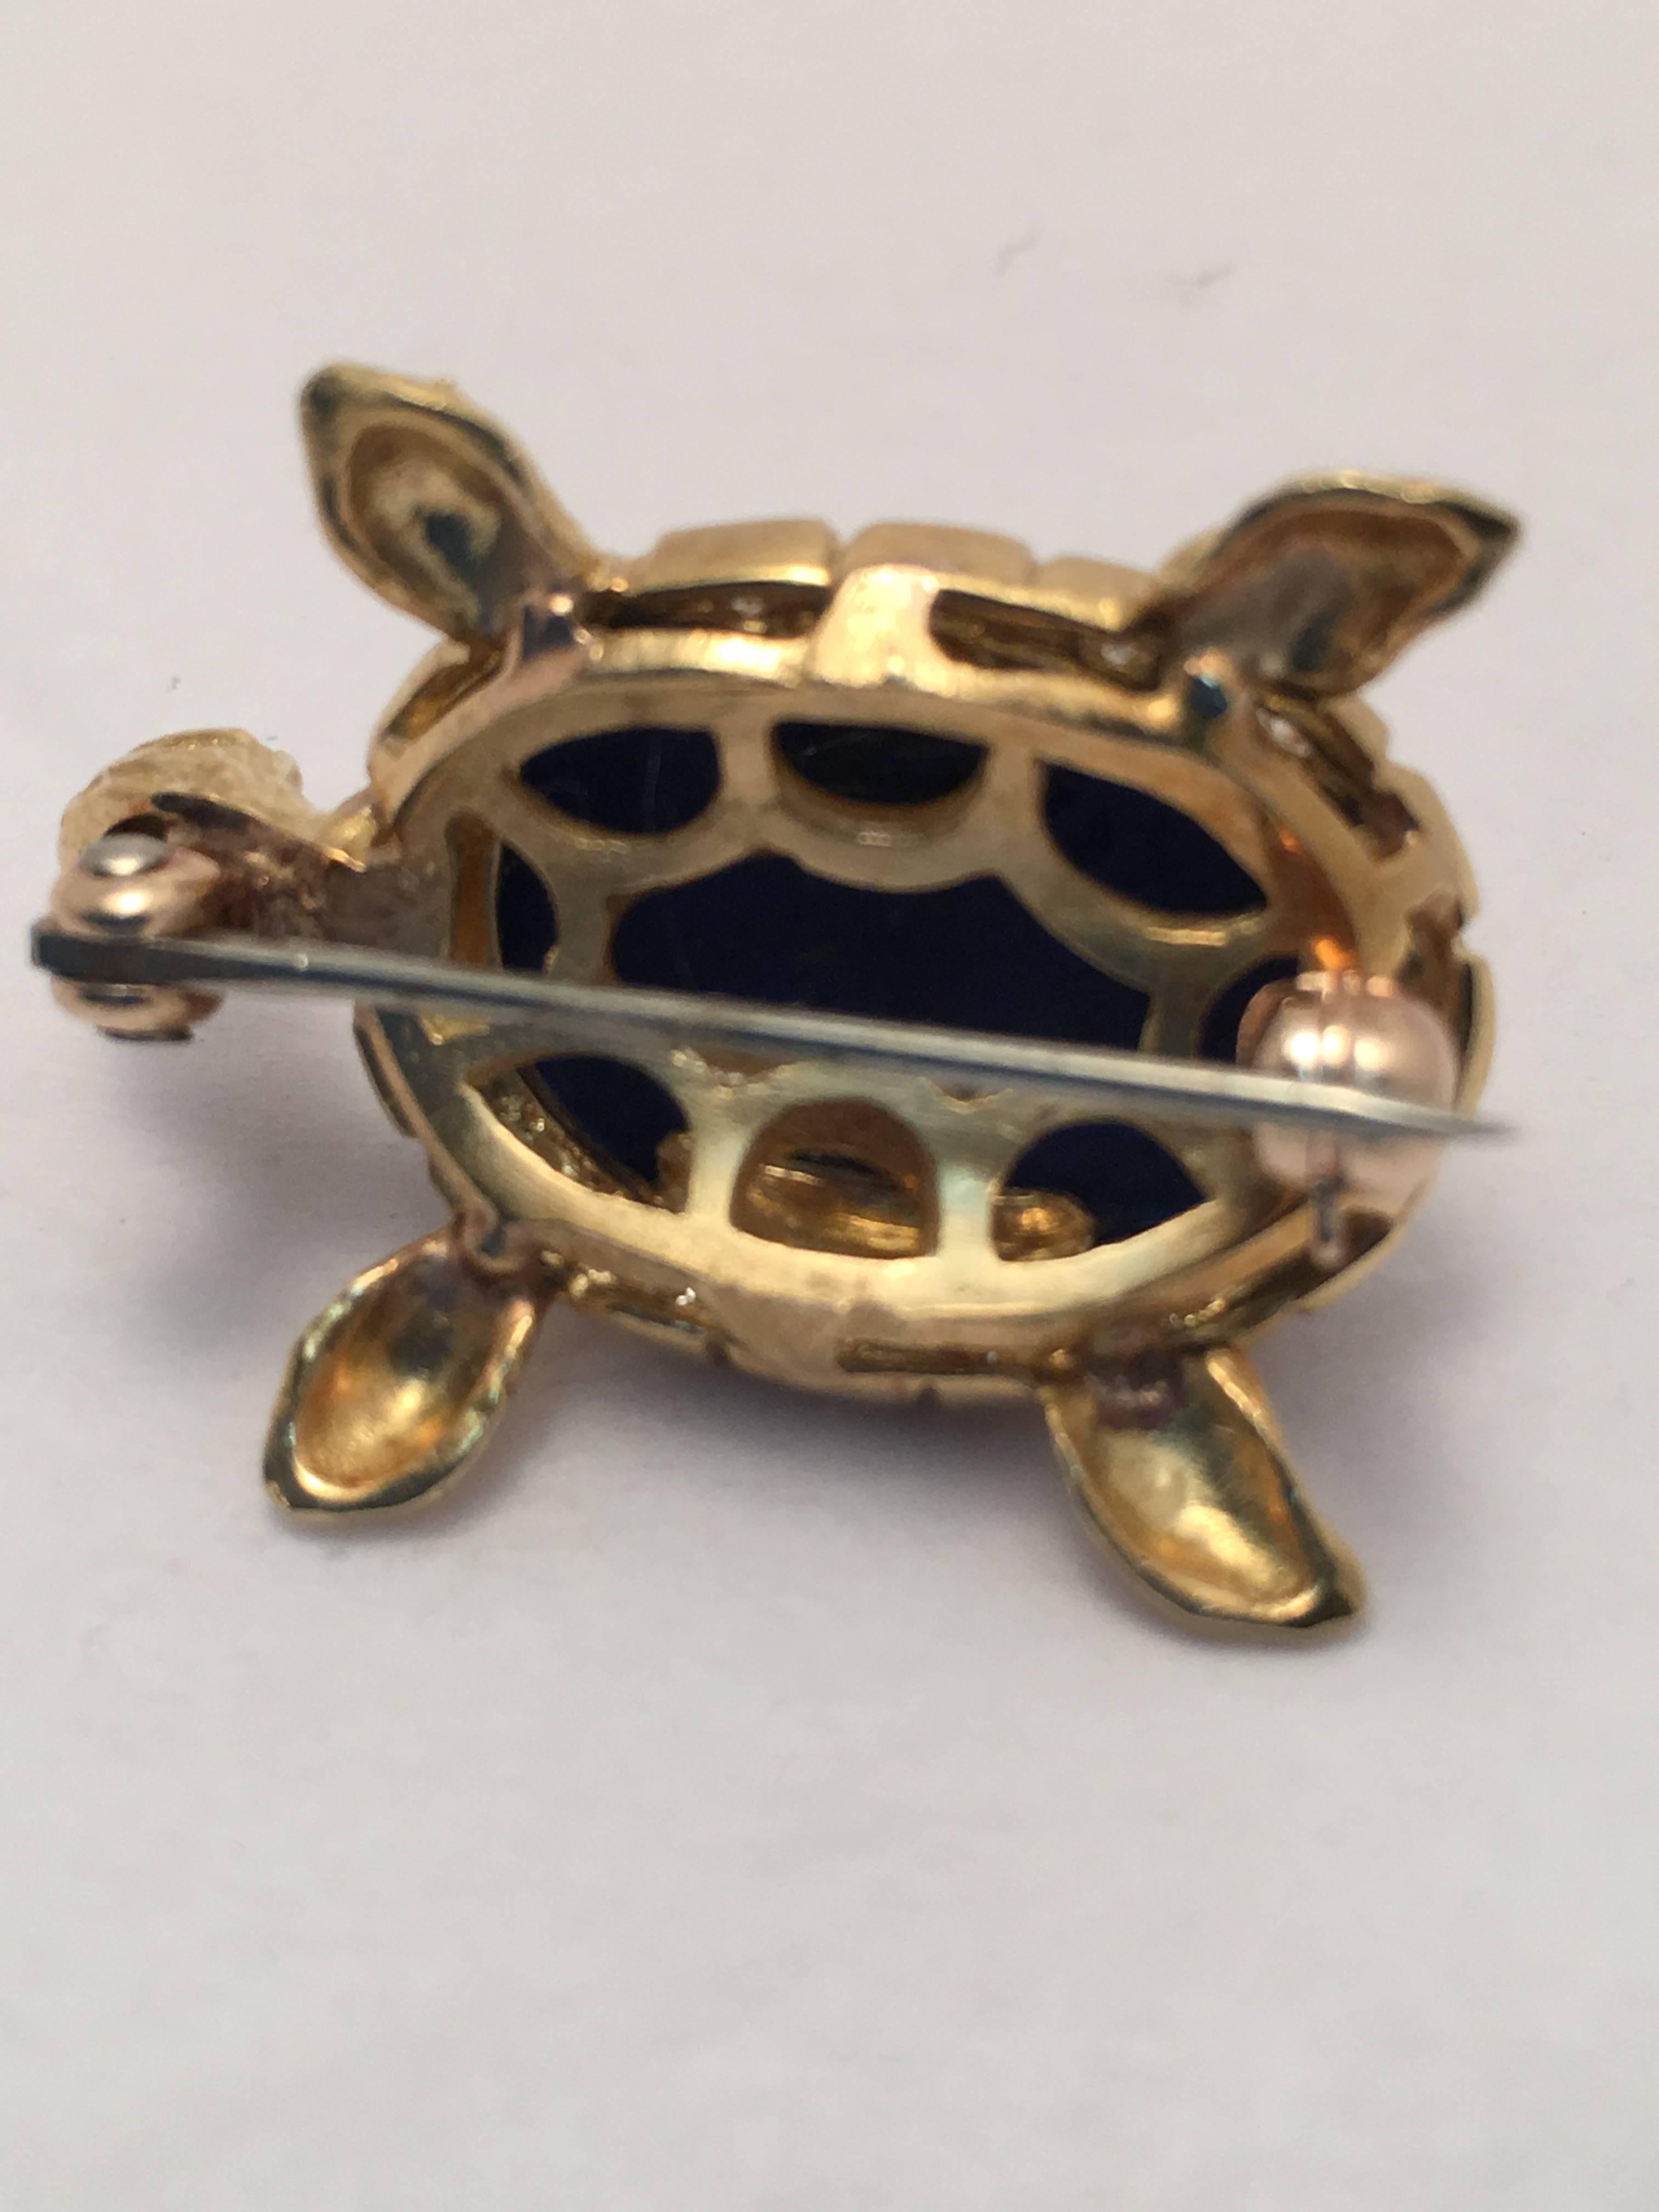 This wonderful turtle is set with a beautiful oval lapis lazuli cabochon stone and surrounded by 16 round diamonds weighing approximately .35 ct. total weight.  The eyes of the turtle are 2 round emeralds.  